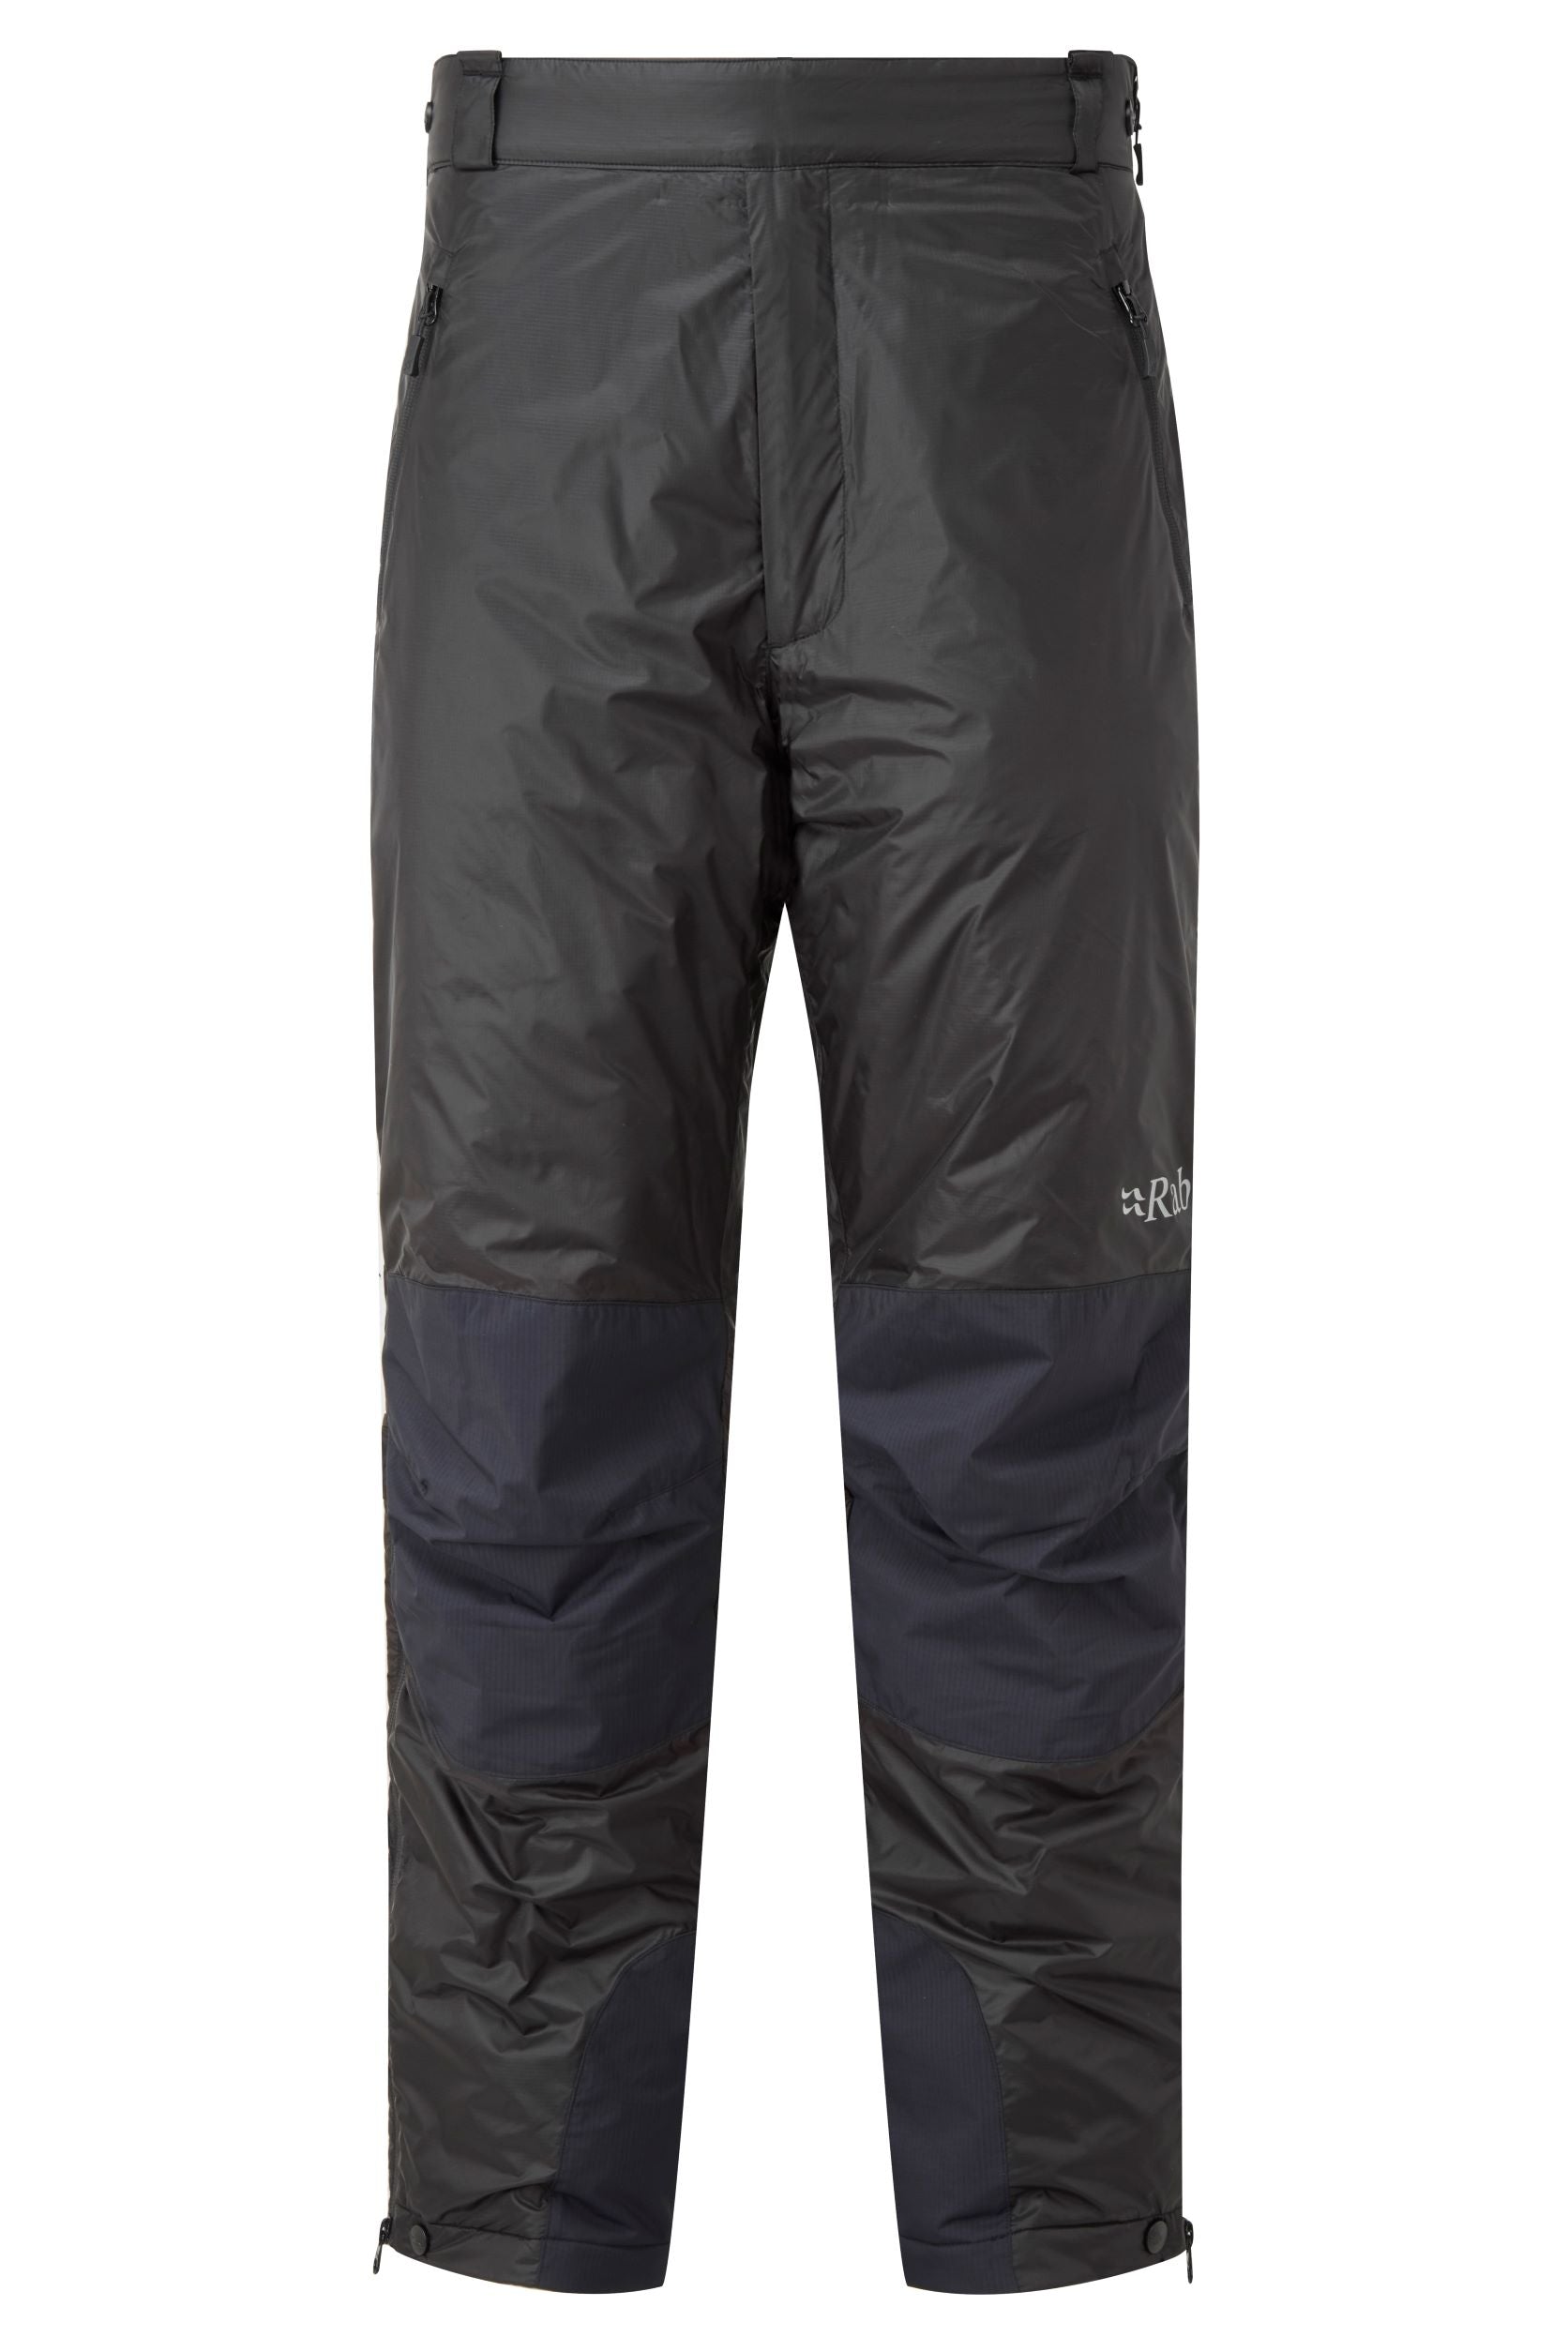 Rab Men's Photon Pants - Outfitters Store